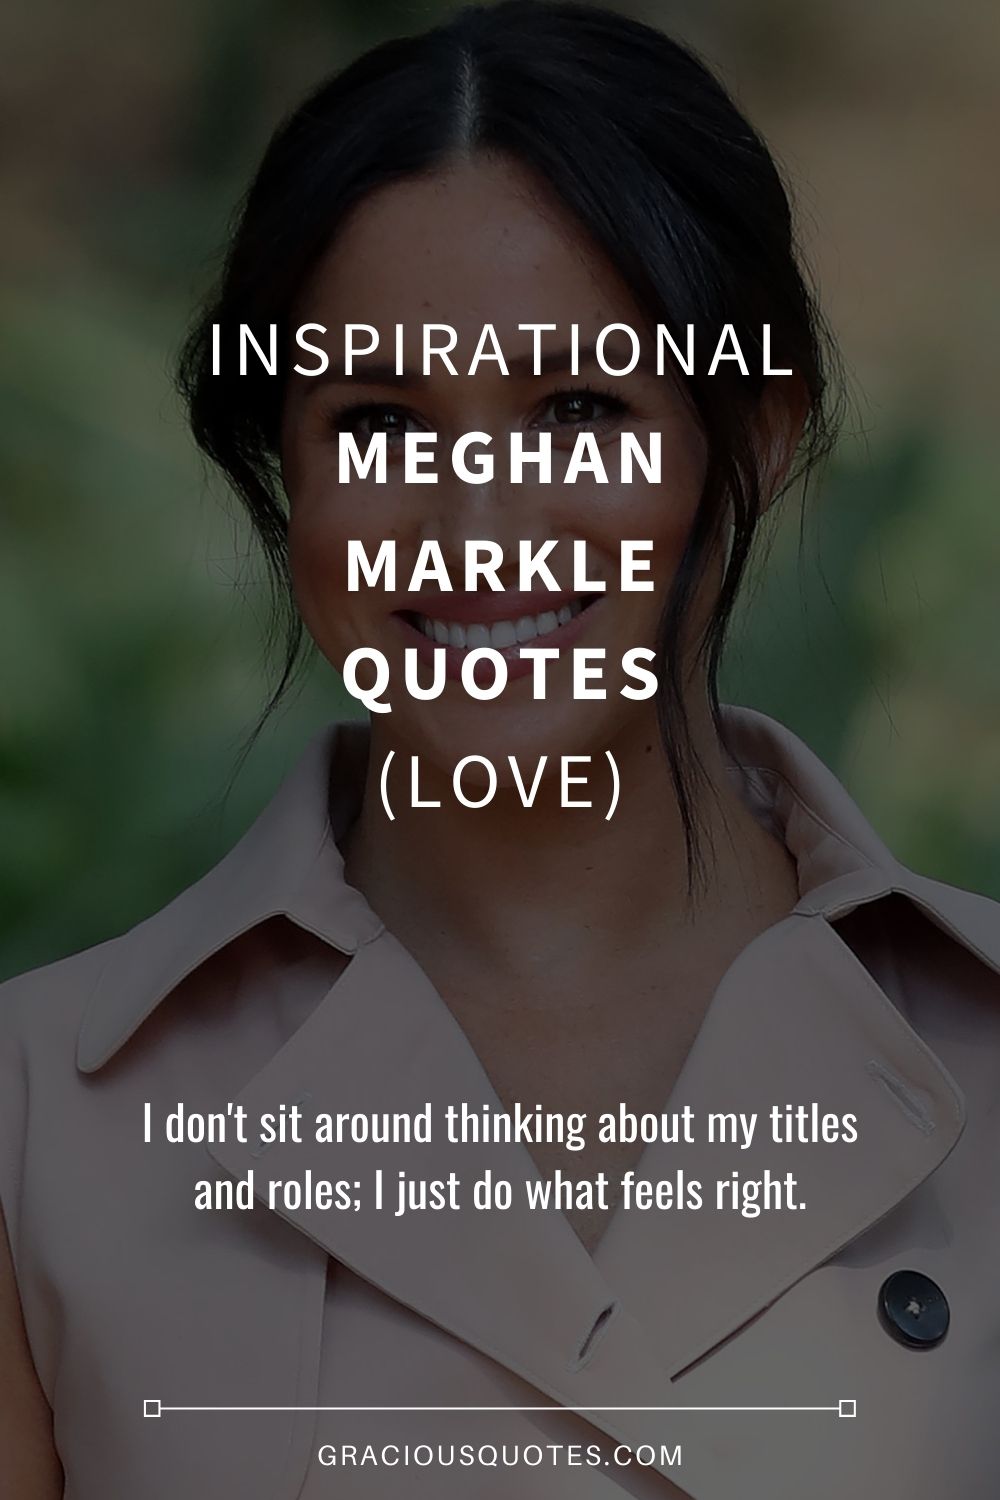 Inspirational Meghan Markle Quotes (LOVE) - Gracious Quotes